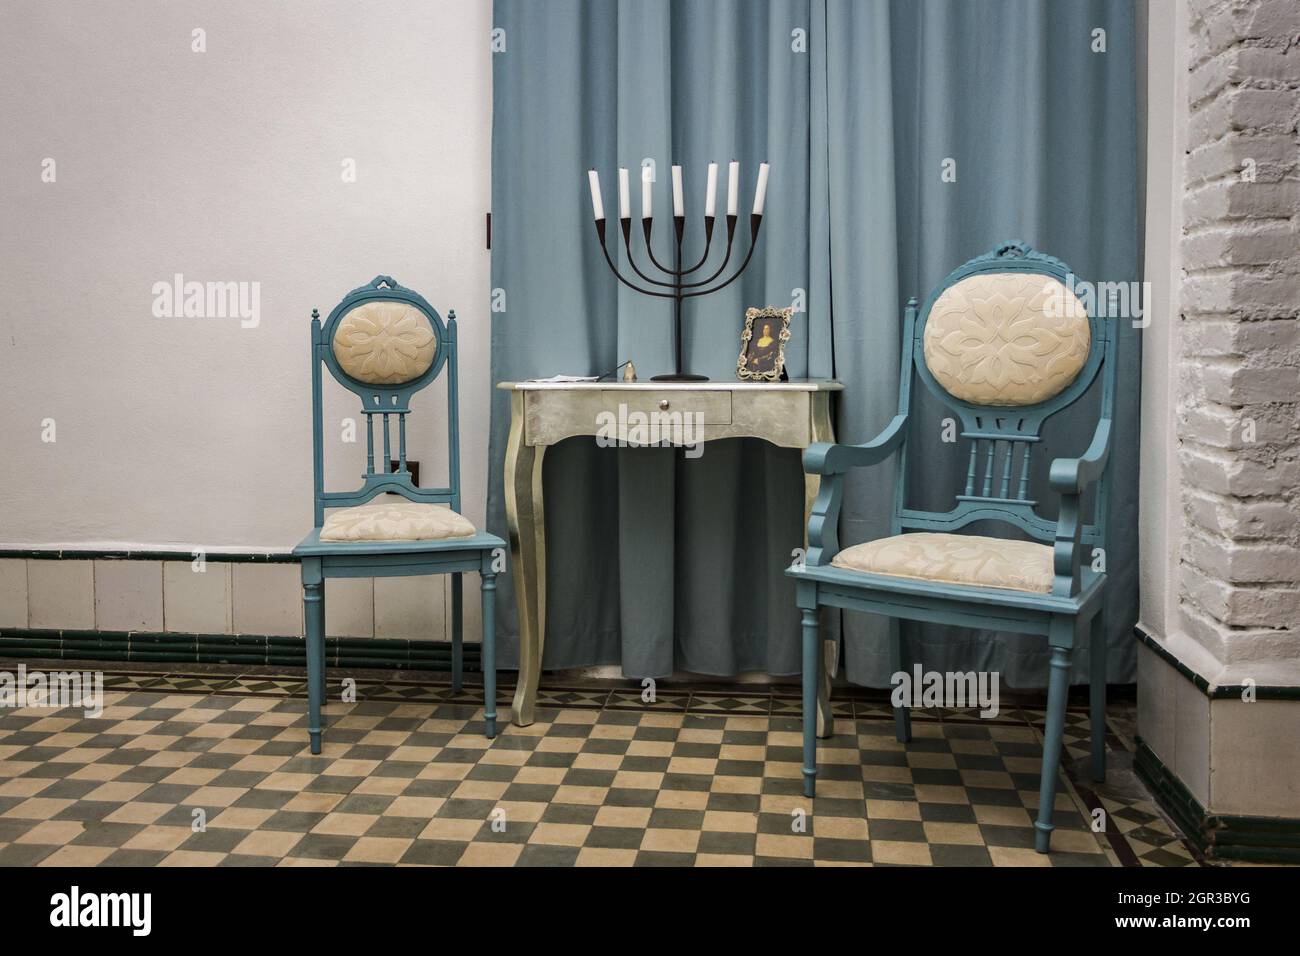 Vintage interior with two chairs, a small table, and a candle holder. Stock Photo